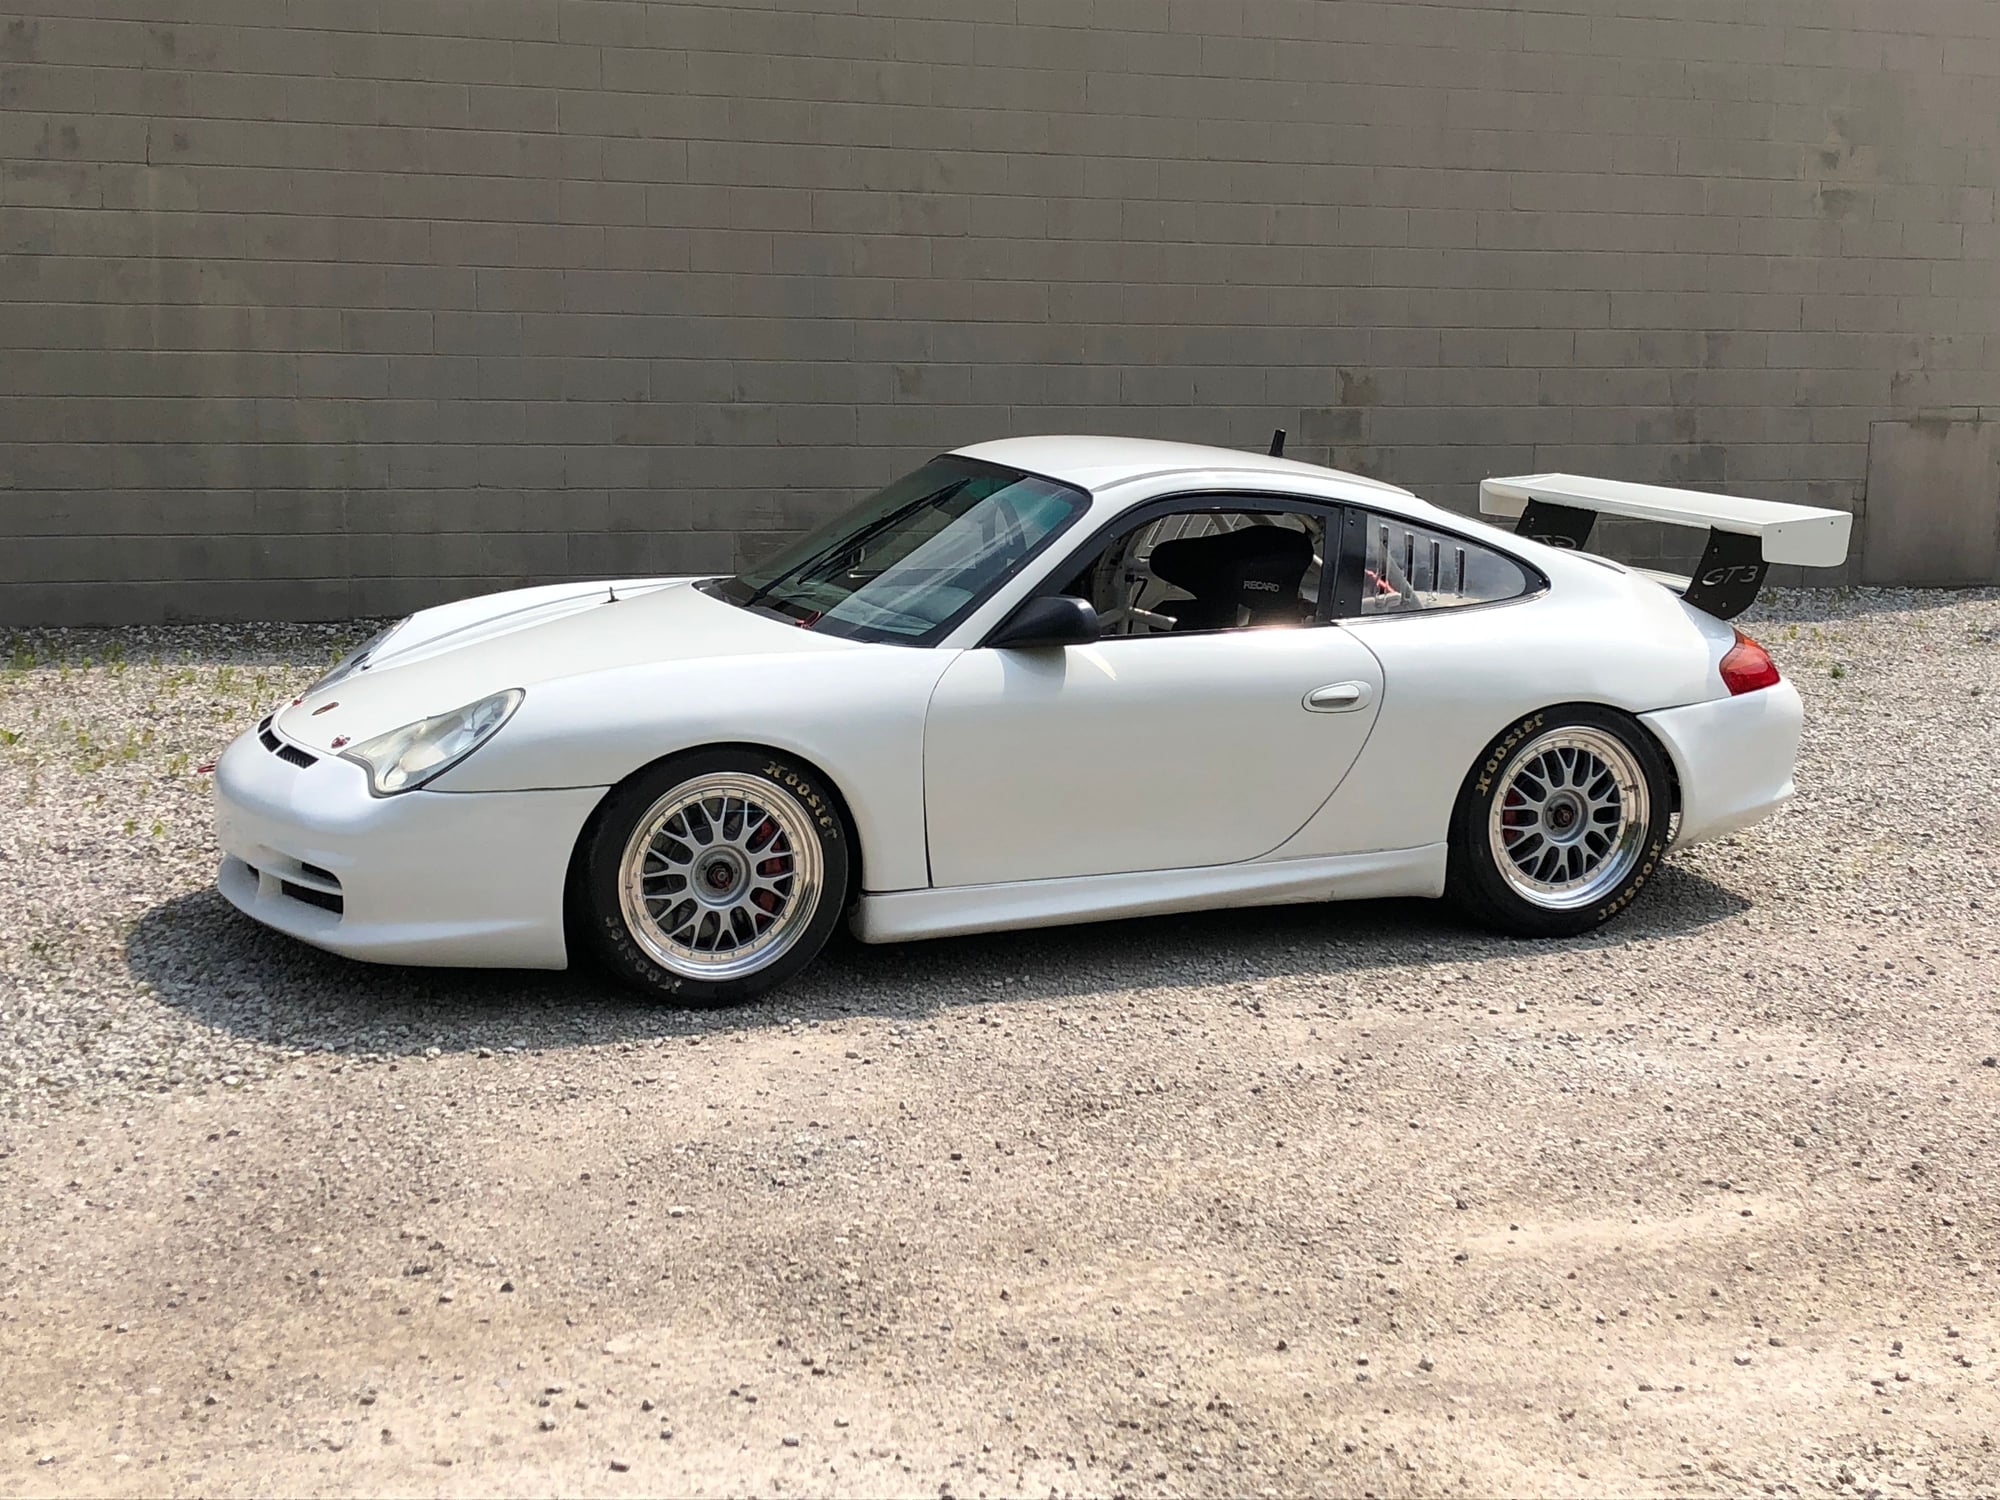 2003 Porsche 911 - 2003 Porsche 996 GT3 Cup - Used - VIN 12345679901234567 - 6 cyl - 2WD - Manual - Coupe - White - Bay Village, OH 44140, United States